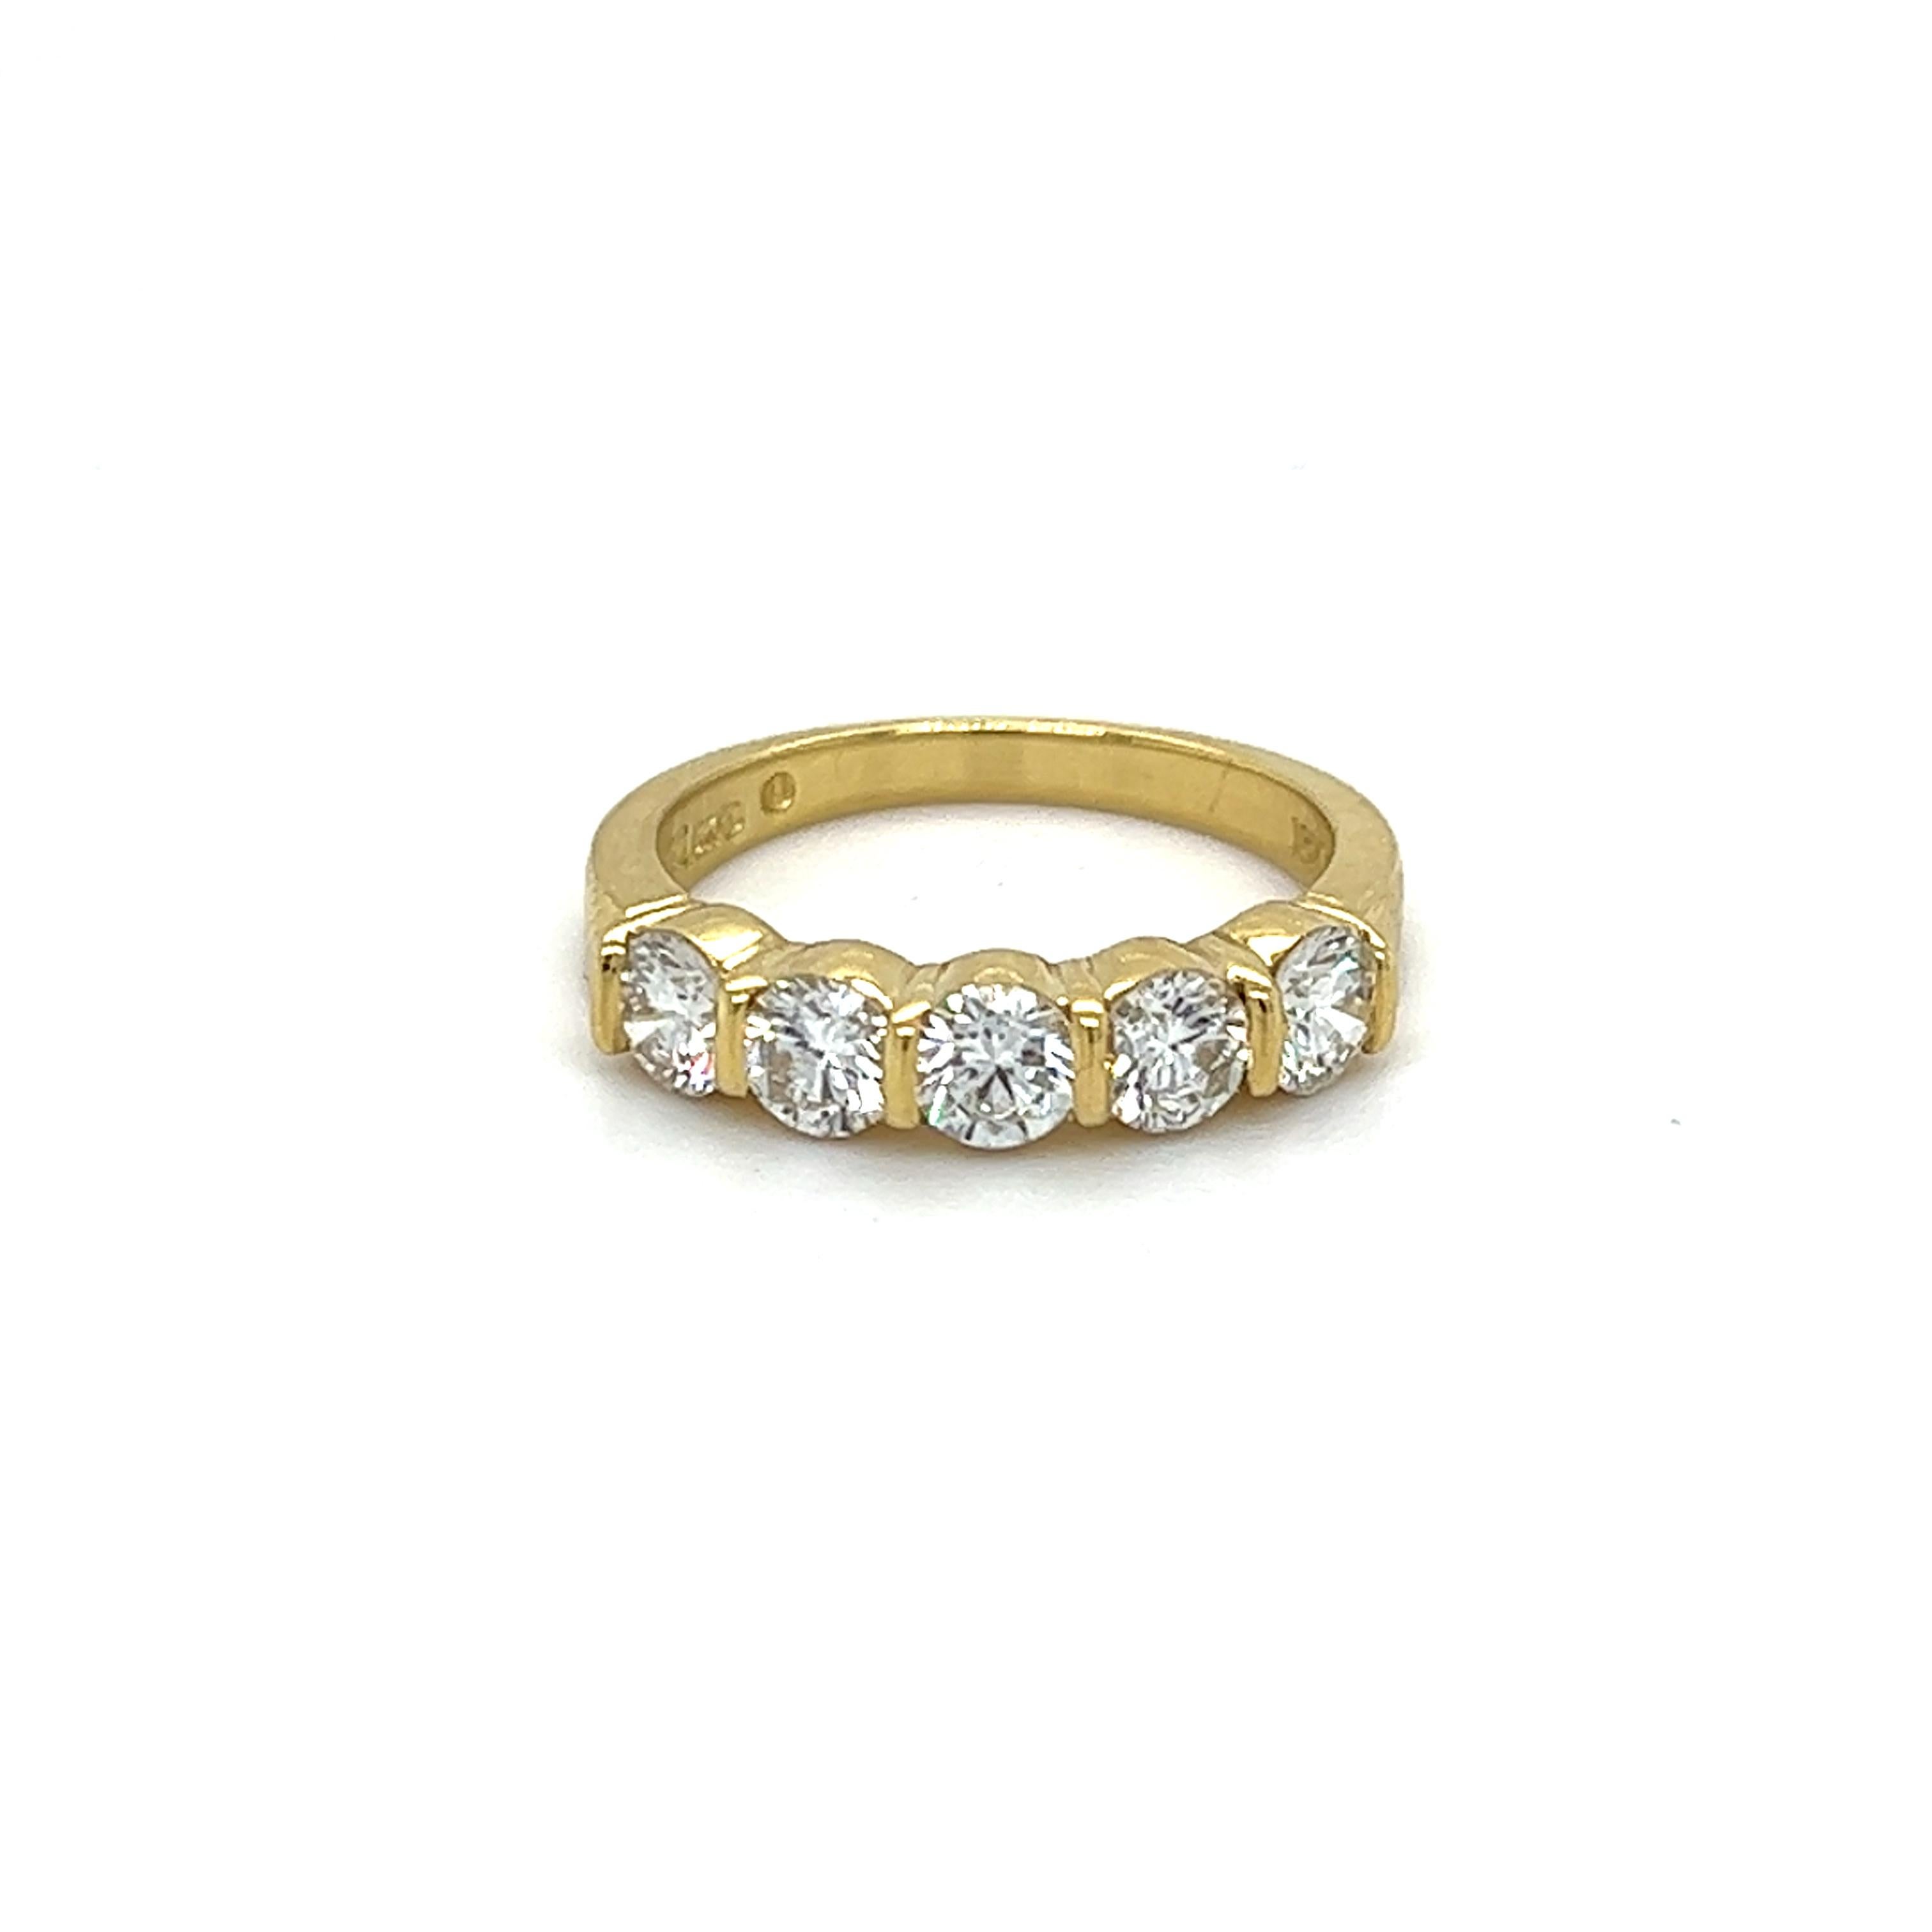 One 18 karat yellow gold band ring, bar set with five (5) round brilliant cut diamonds, approximately 1.00 carat total weight with matching I/J color and VS clarity. The ring is stamped 18K GEMLOK and weighs 3.8 grams total weight.  The ring is a